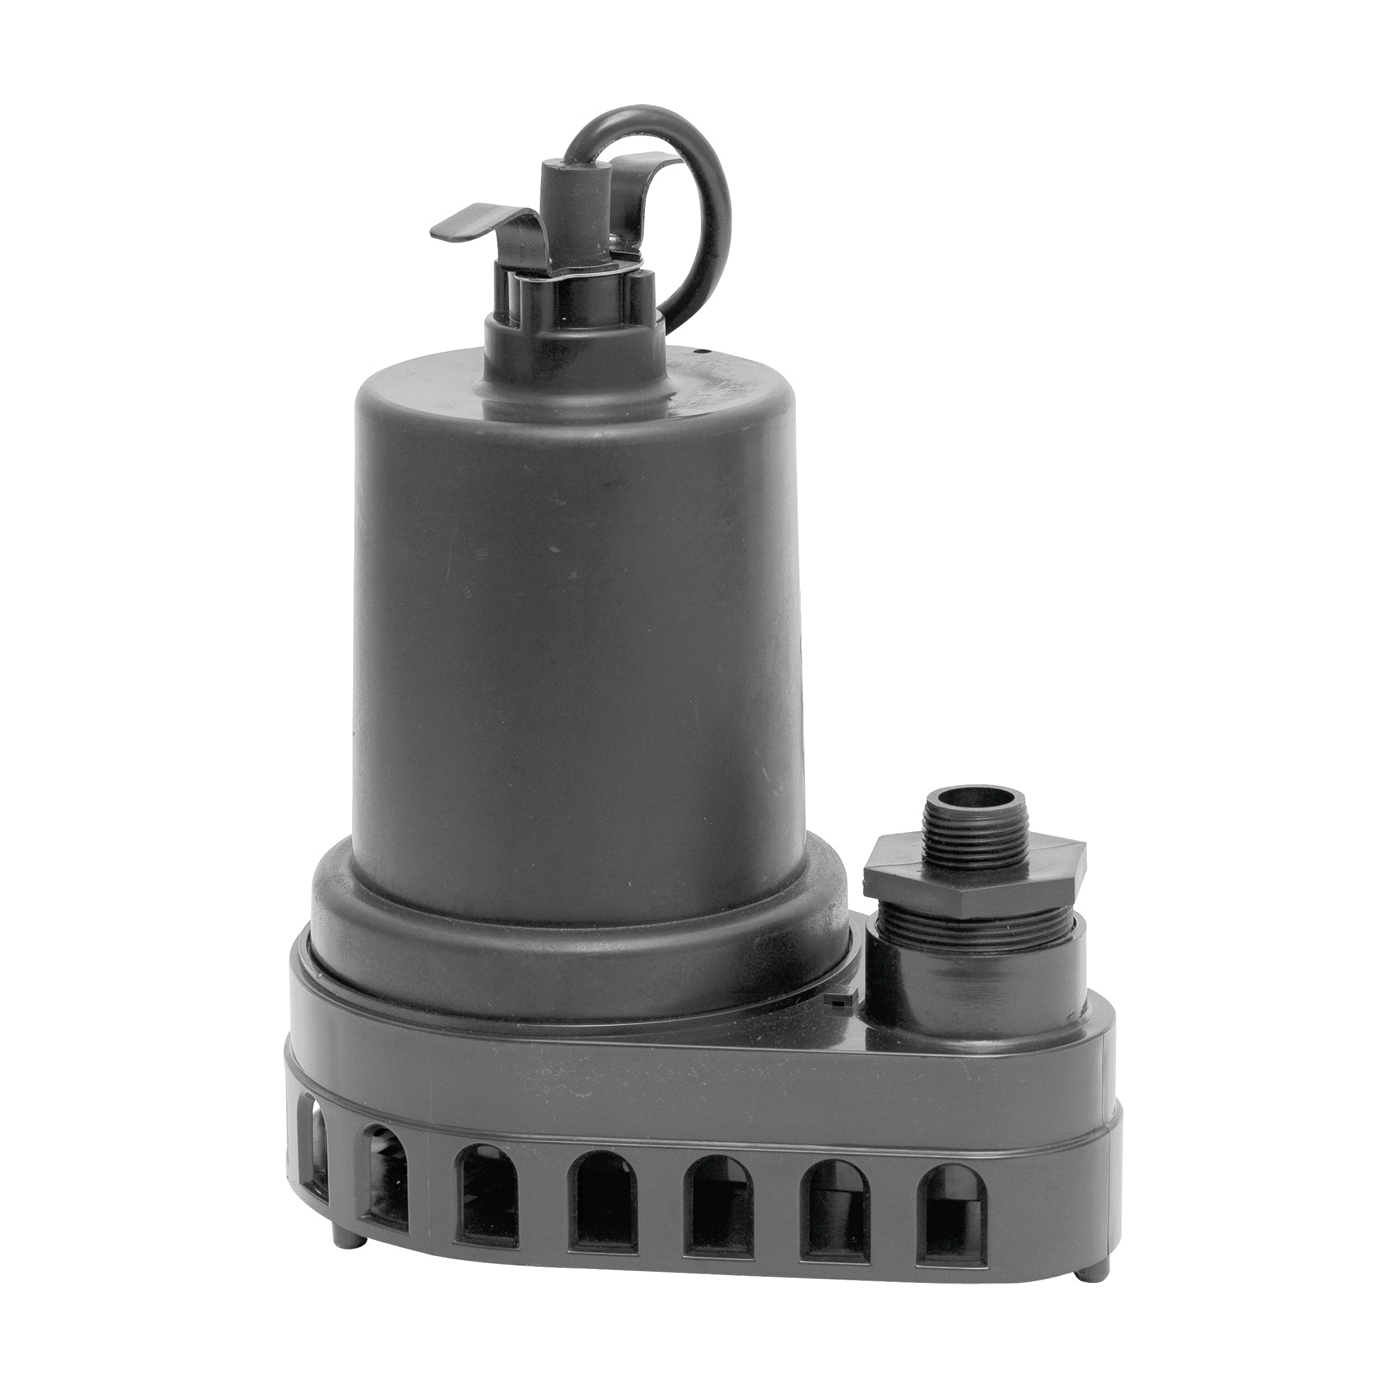 Superior Pump 91570 Submersible Utility Pump, 4.9 A, 120 V, 0.5 hp, 1-1/2 in Outlet, 55 gpm, Thermoplastic Impeller